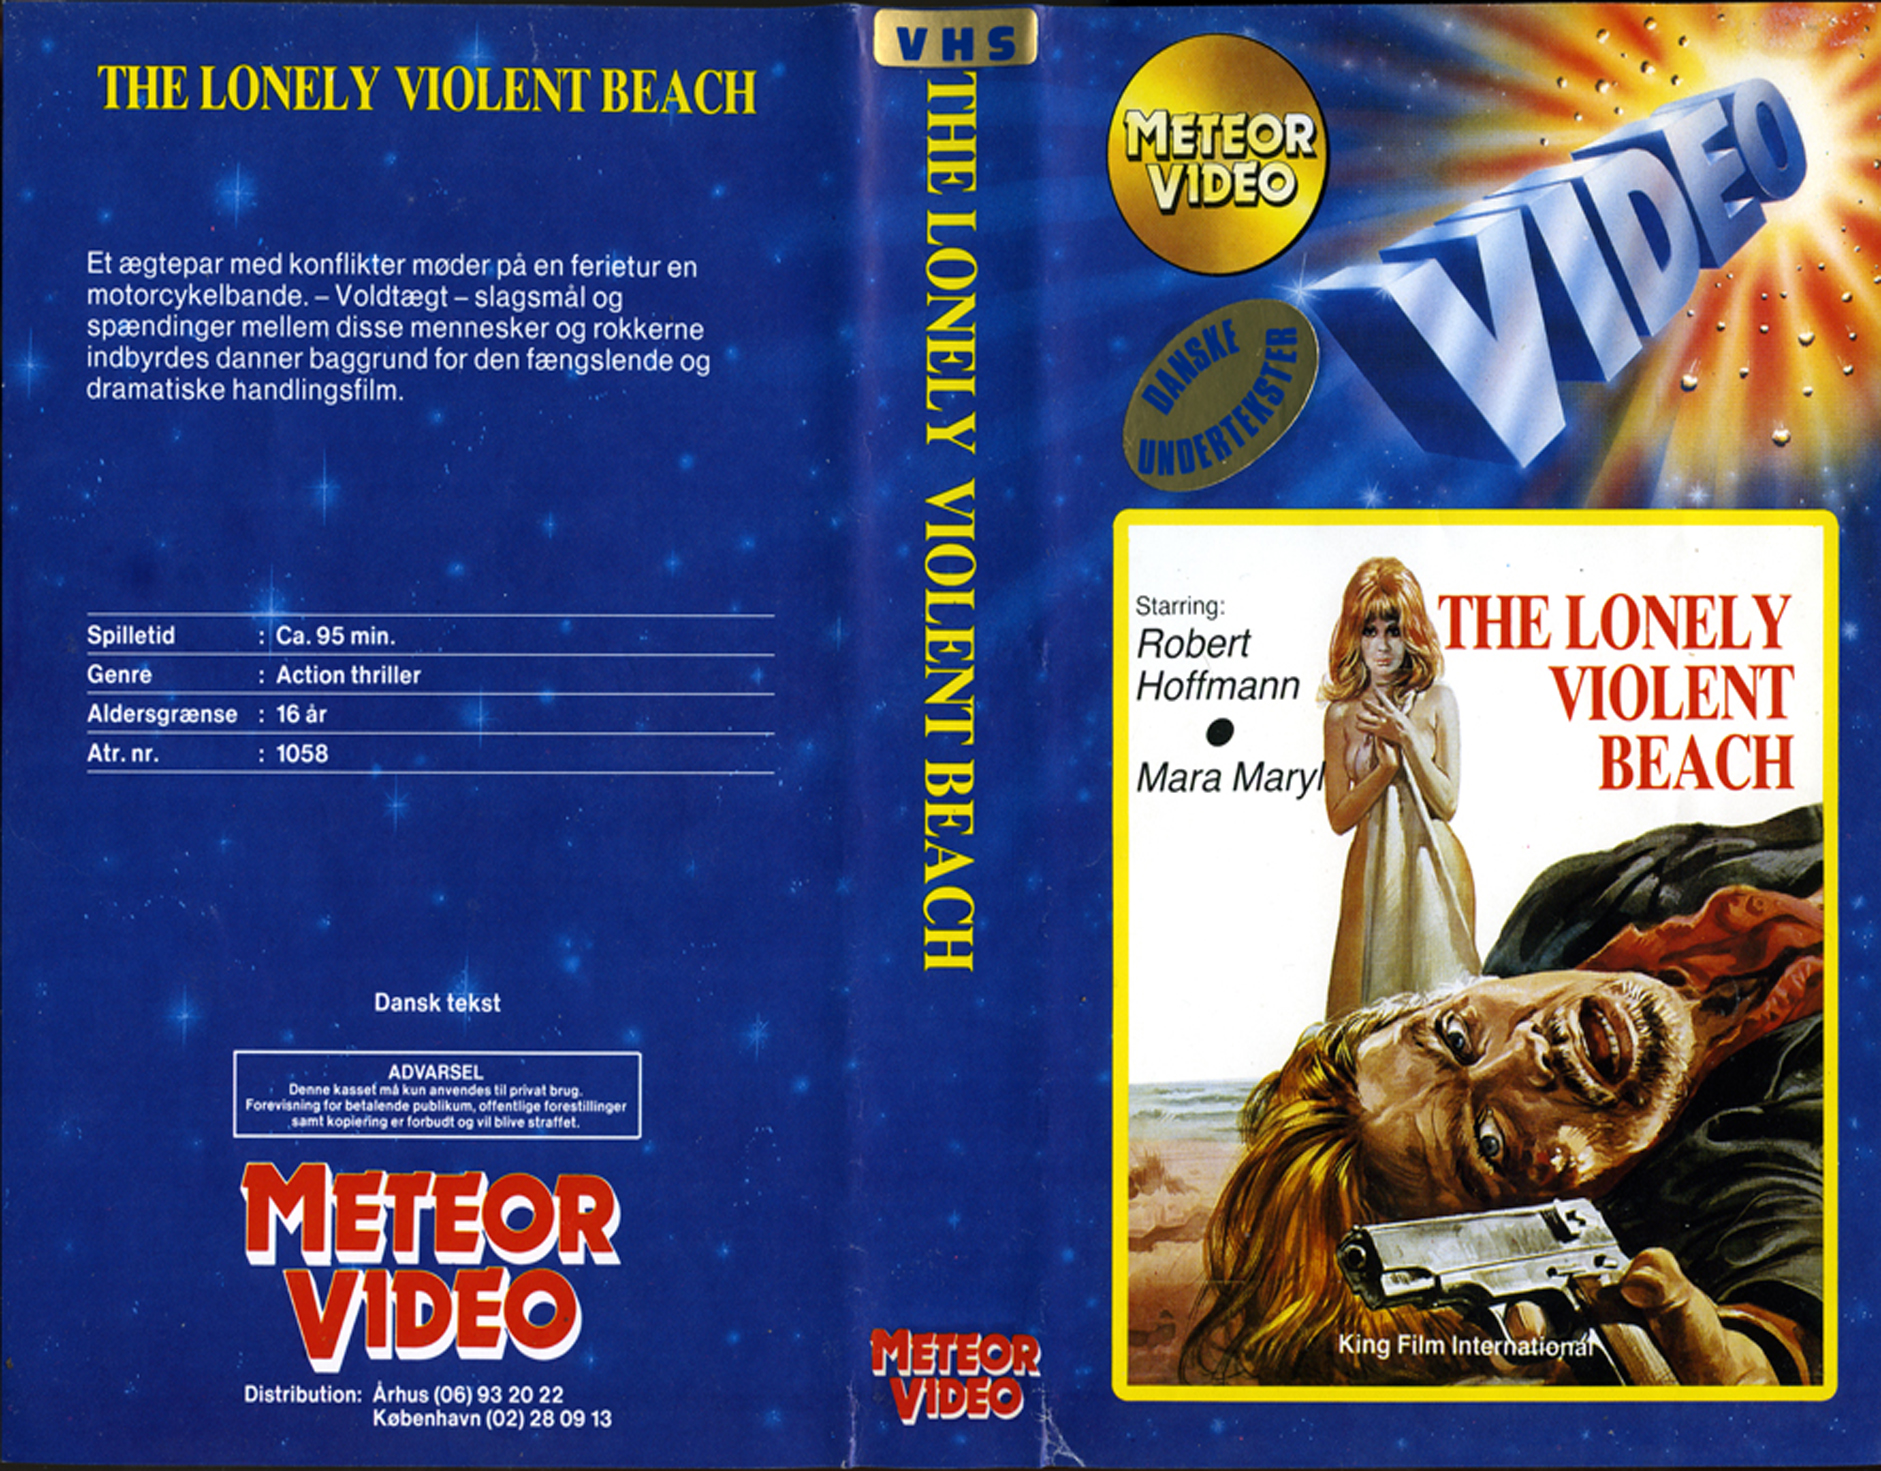 The Lonely Violent Beach movie